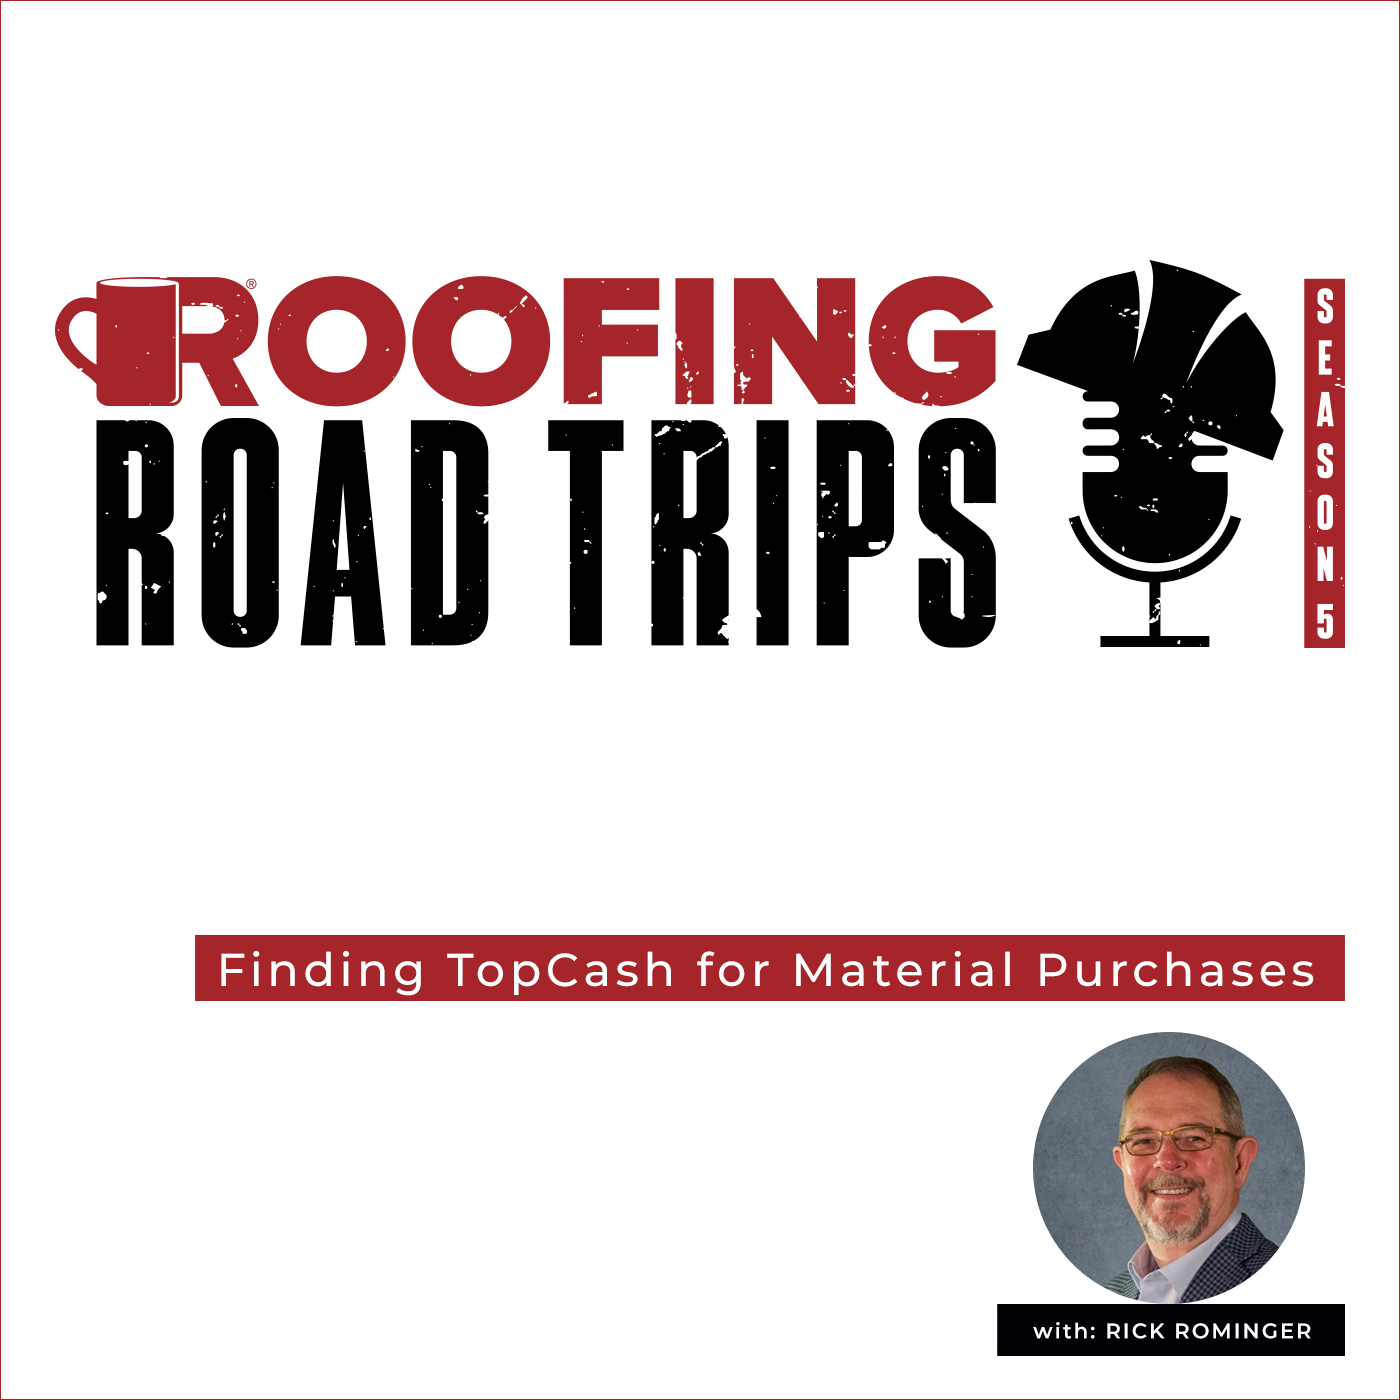 Rick Rominger - Finding TopCash for Material Purchases